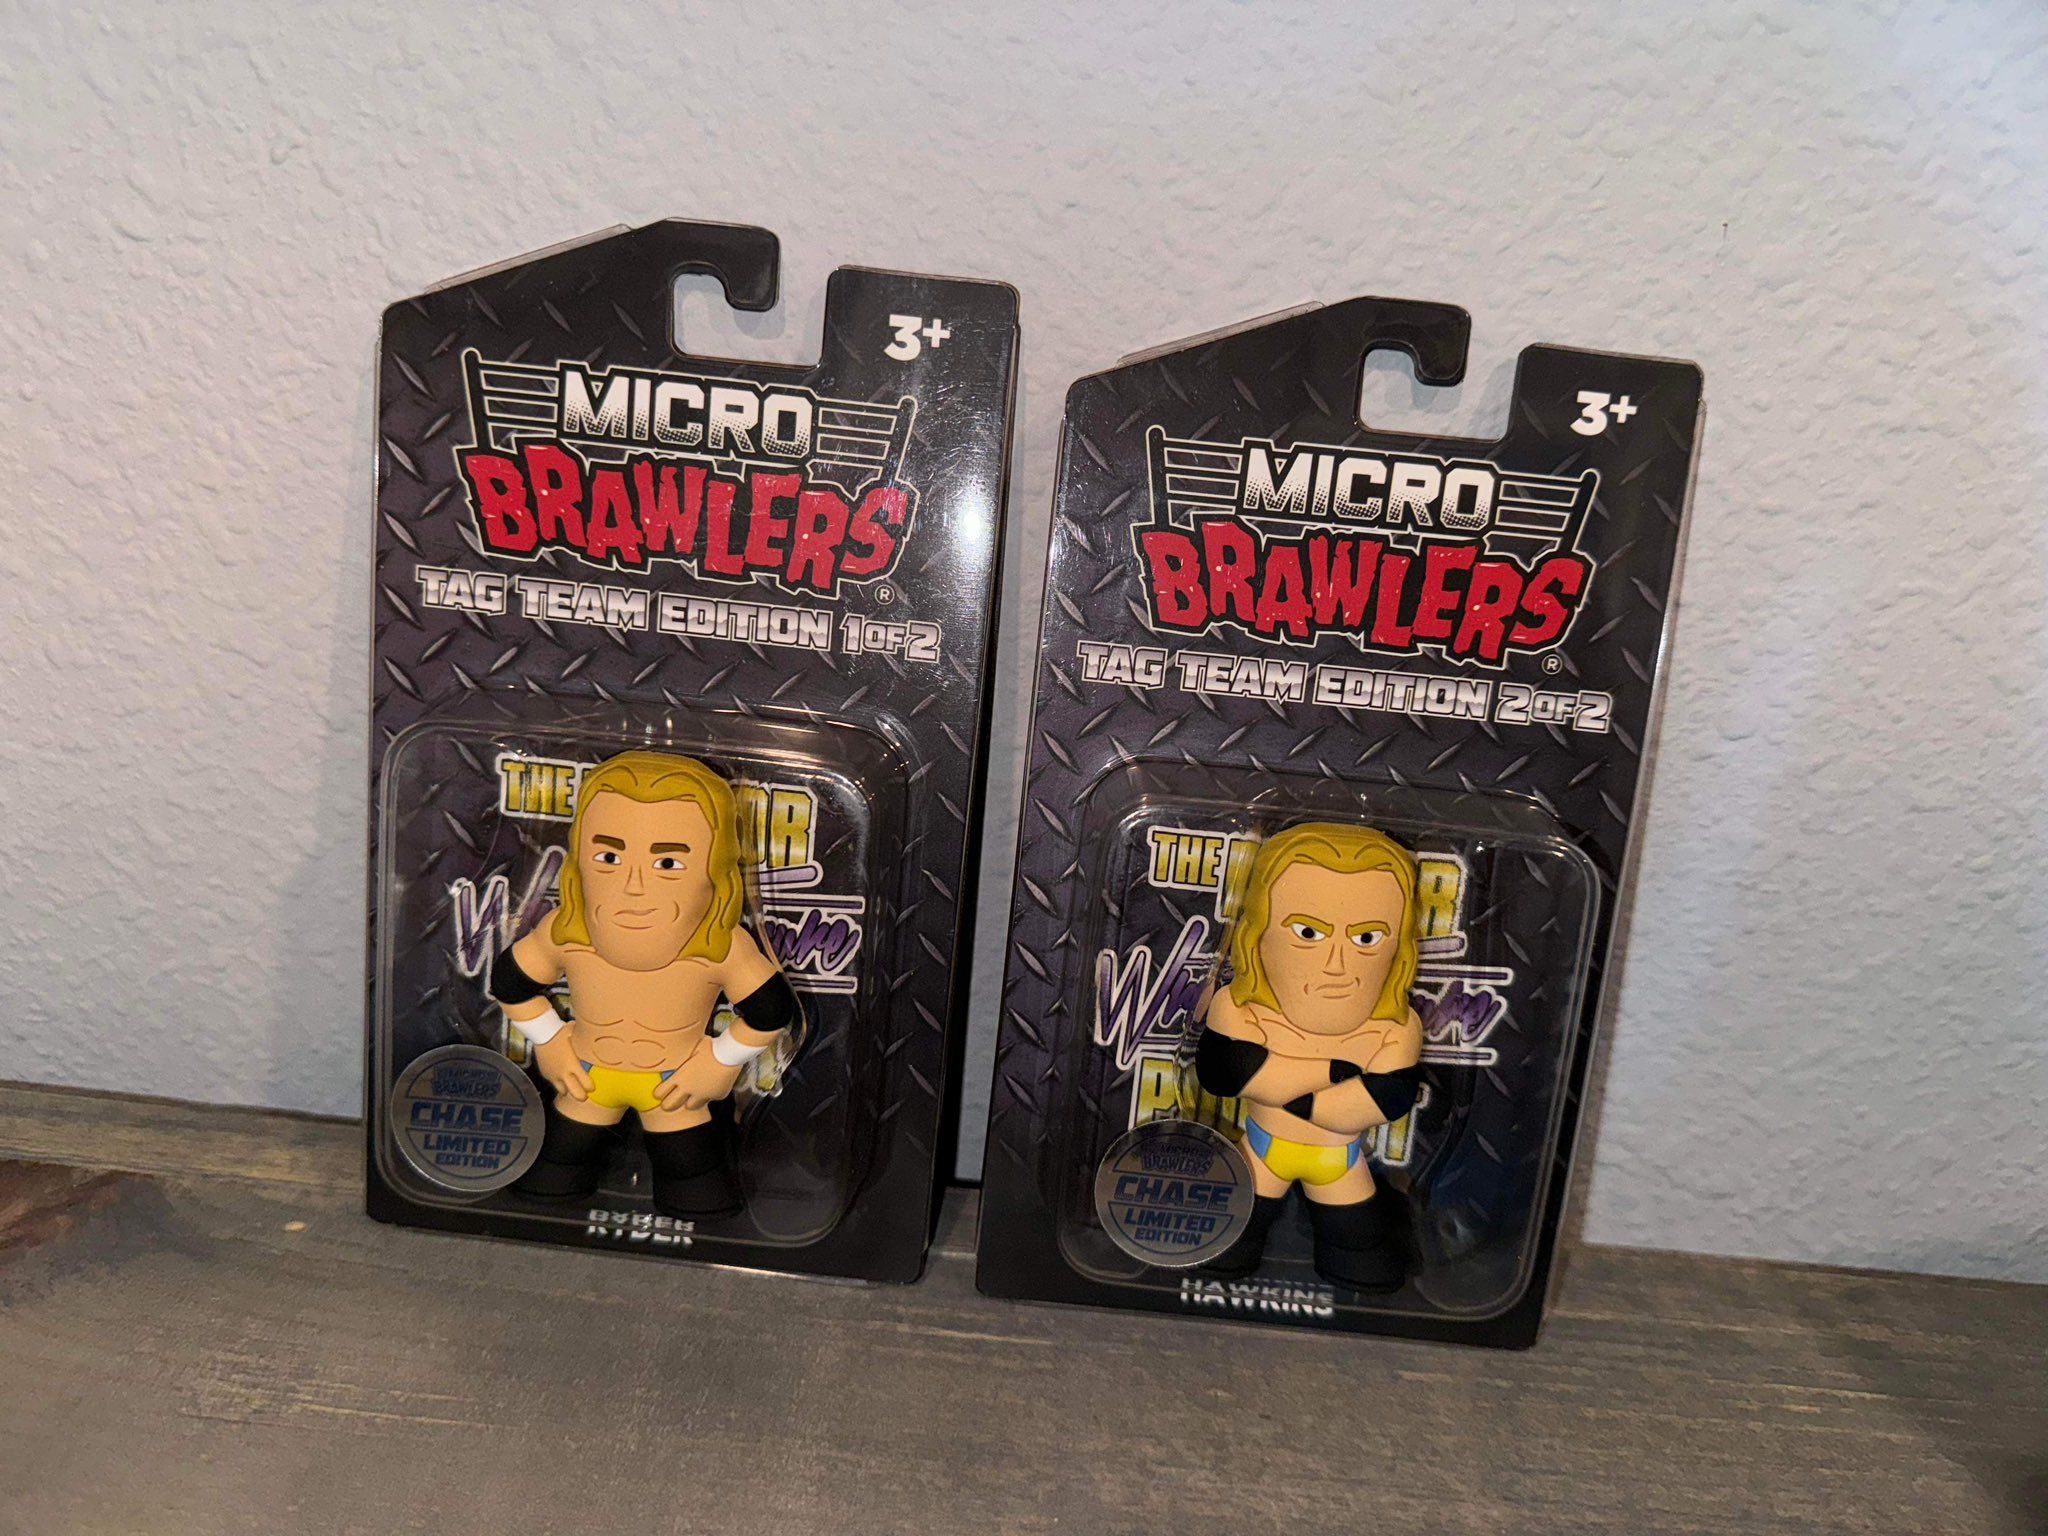 The Major Wrestling Figure Podcast on X: Not many “Major Brothers” items  out there but what do you think about the chase Micro Brawlers from  @PWTees' Major Mystery Crate? @TheMattCardona had to